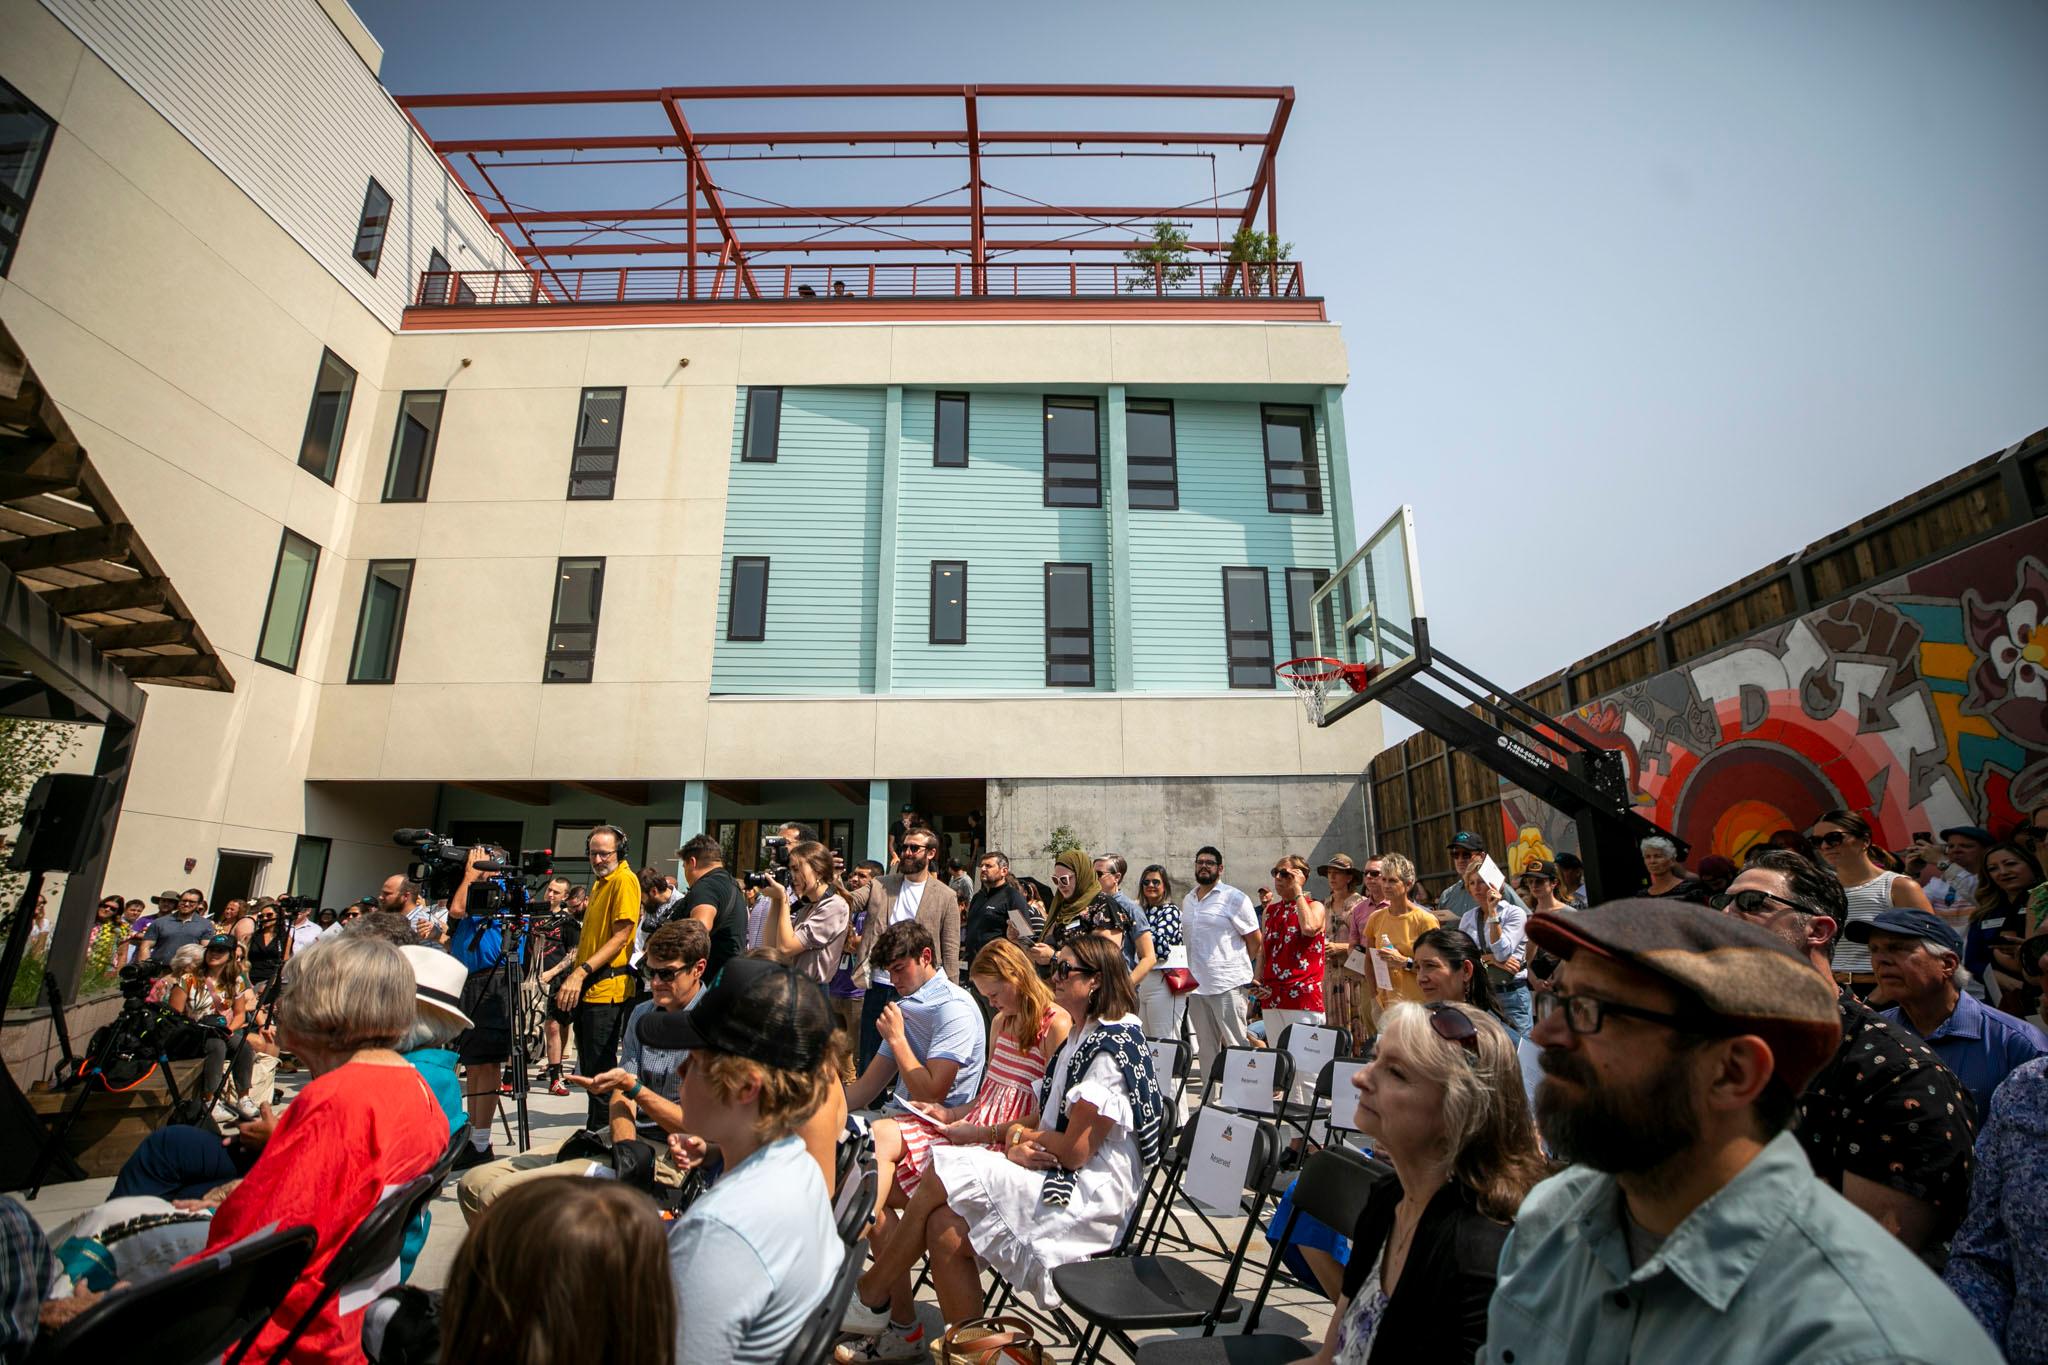 A large crown of people stands on a patio, beneath a new building colored in beige, turquoise and rust.